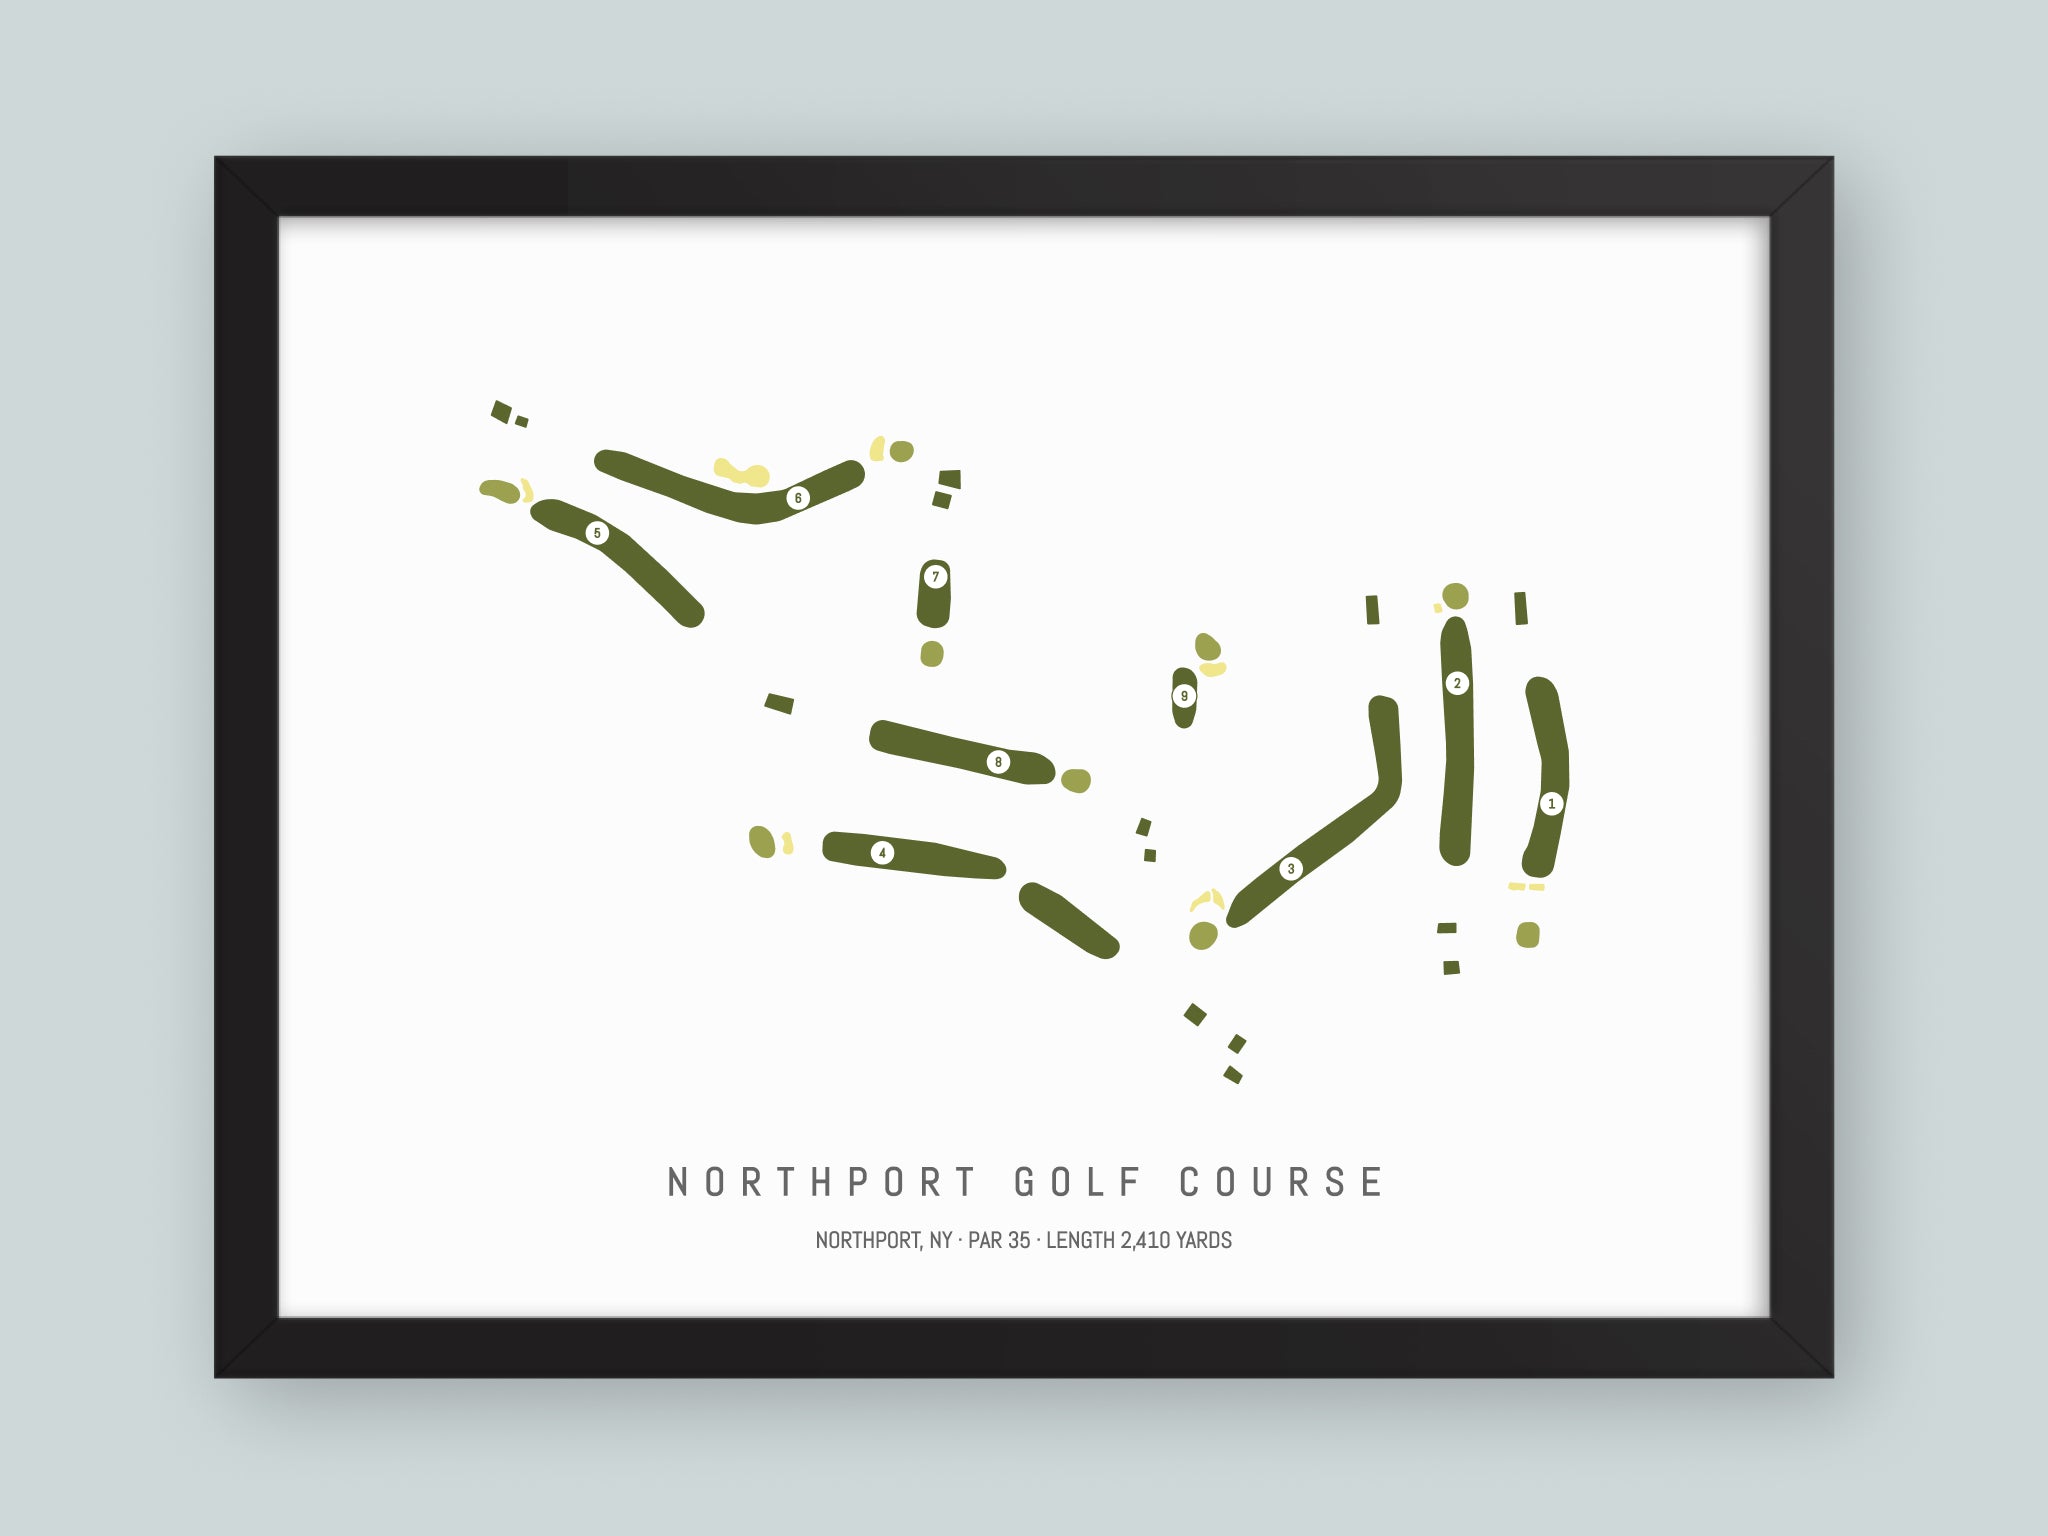 Northport-Golf-Course-NY--Black-Frame-24x18-With-Hole-Numbers